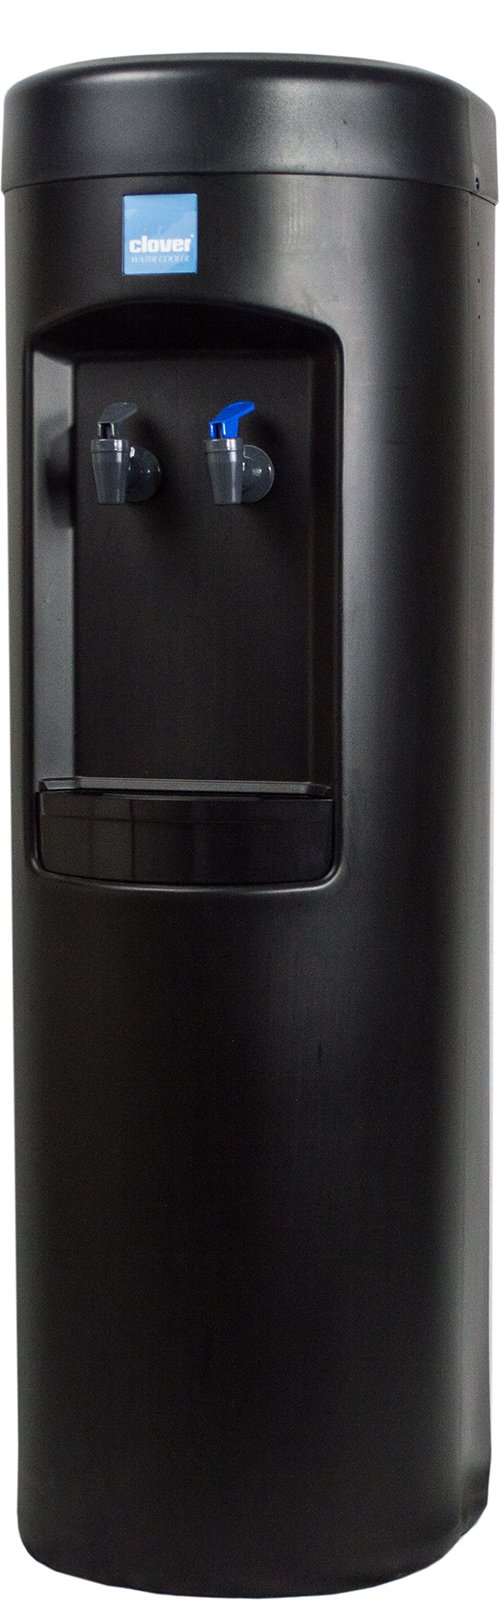 Clover B7B Room Temp and Cold Bottleless Water Dispenser with Conversion Kit, Install Kit, Filter, Black